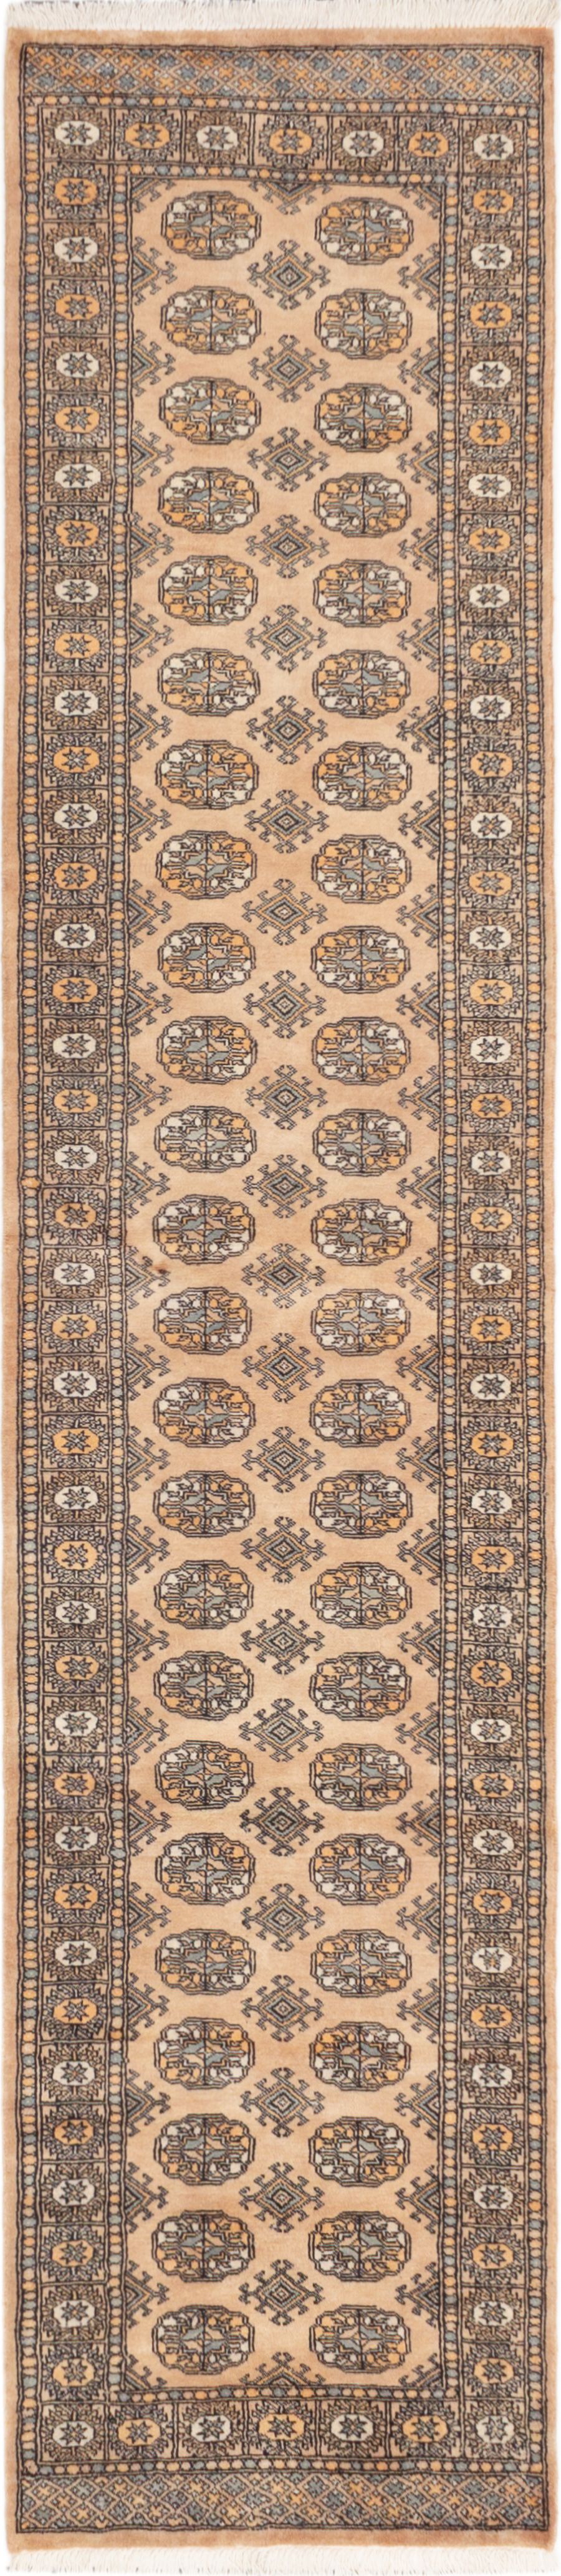 Hand-knotted Finest Peshawar Bokhara Tan Wool Rug 2'7" x 11'10" Size: 2'7" x 11'10"  